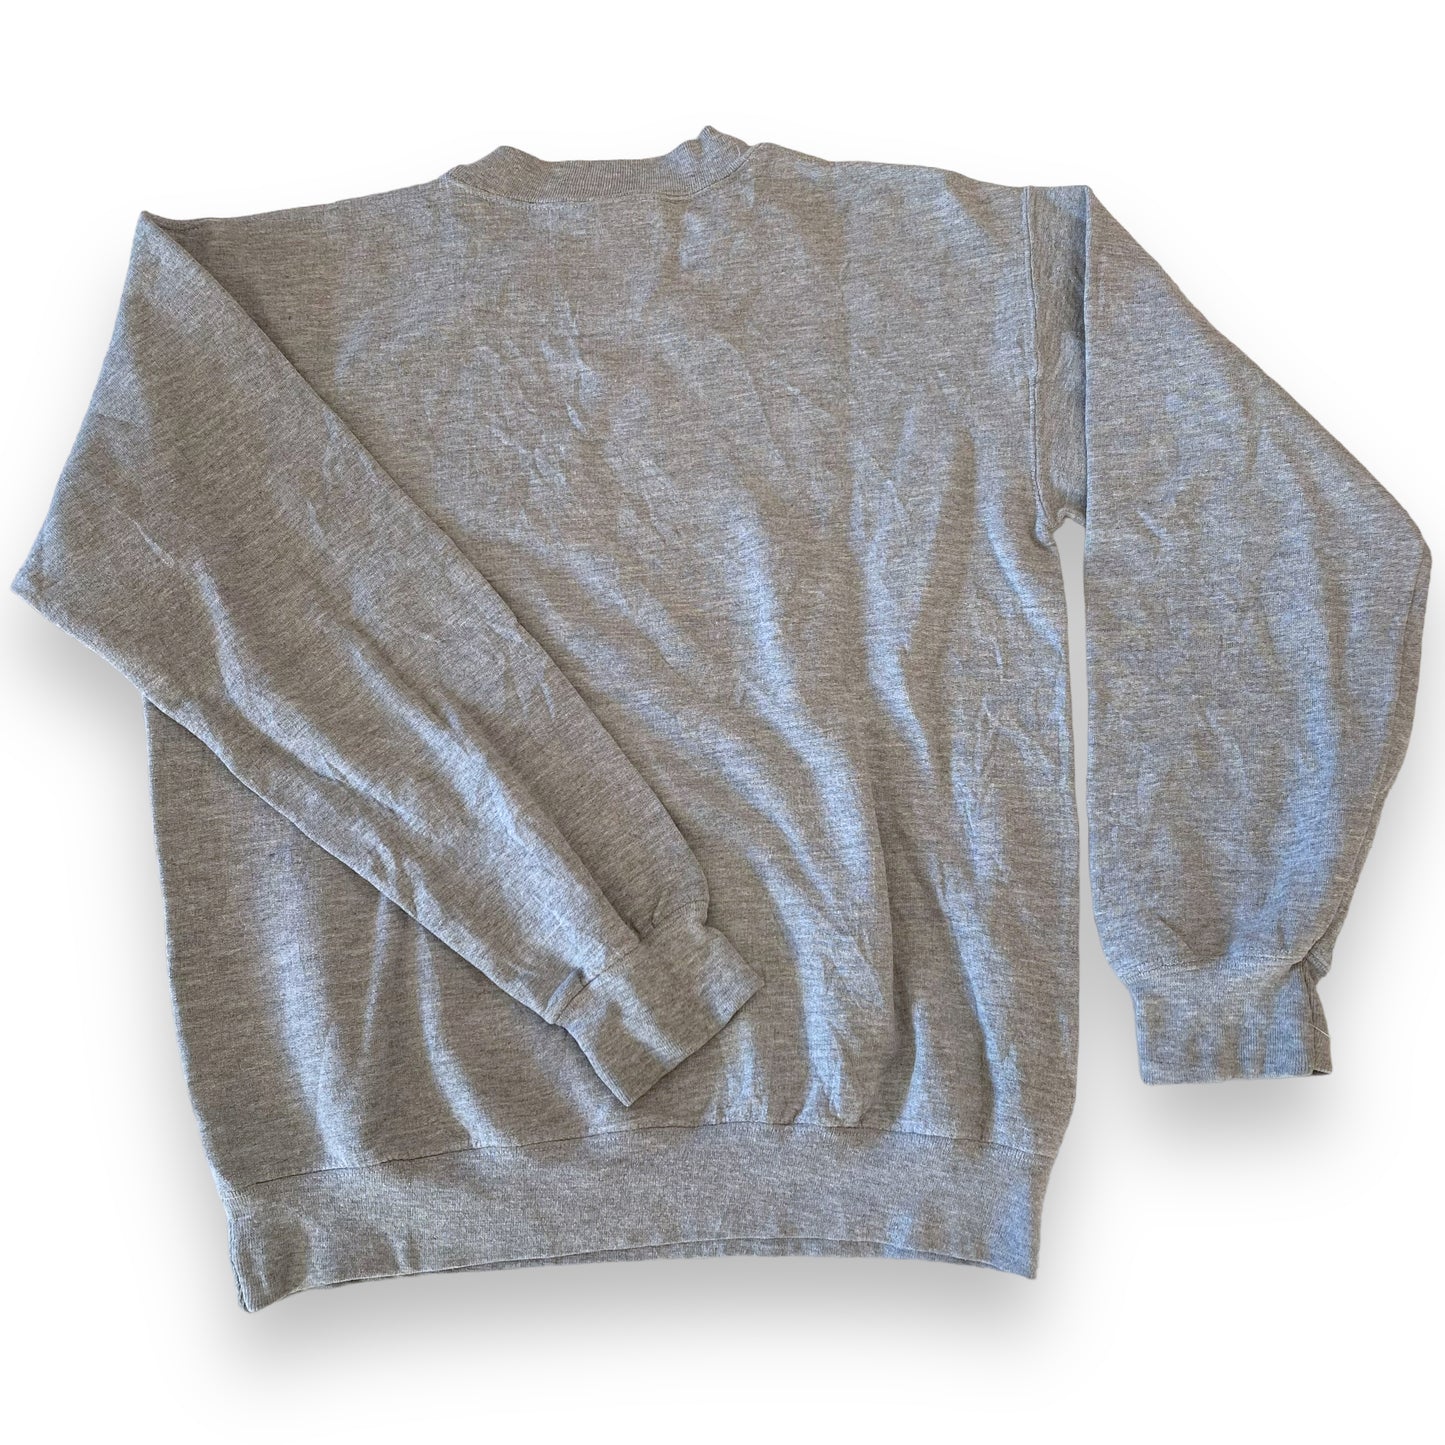 USA college sweater gray / Size S